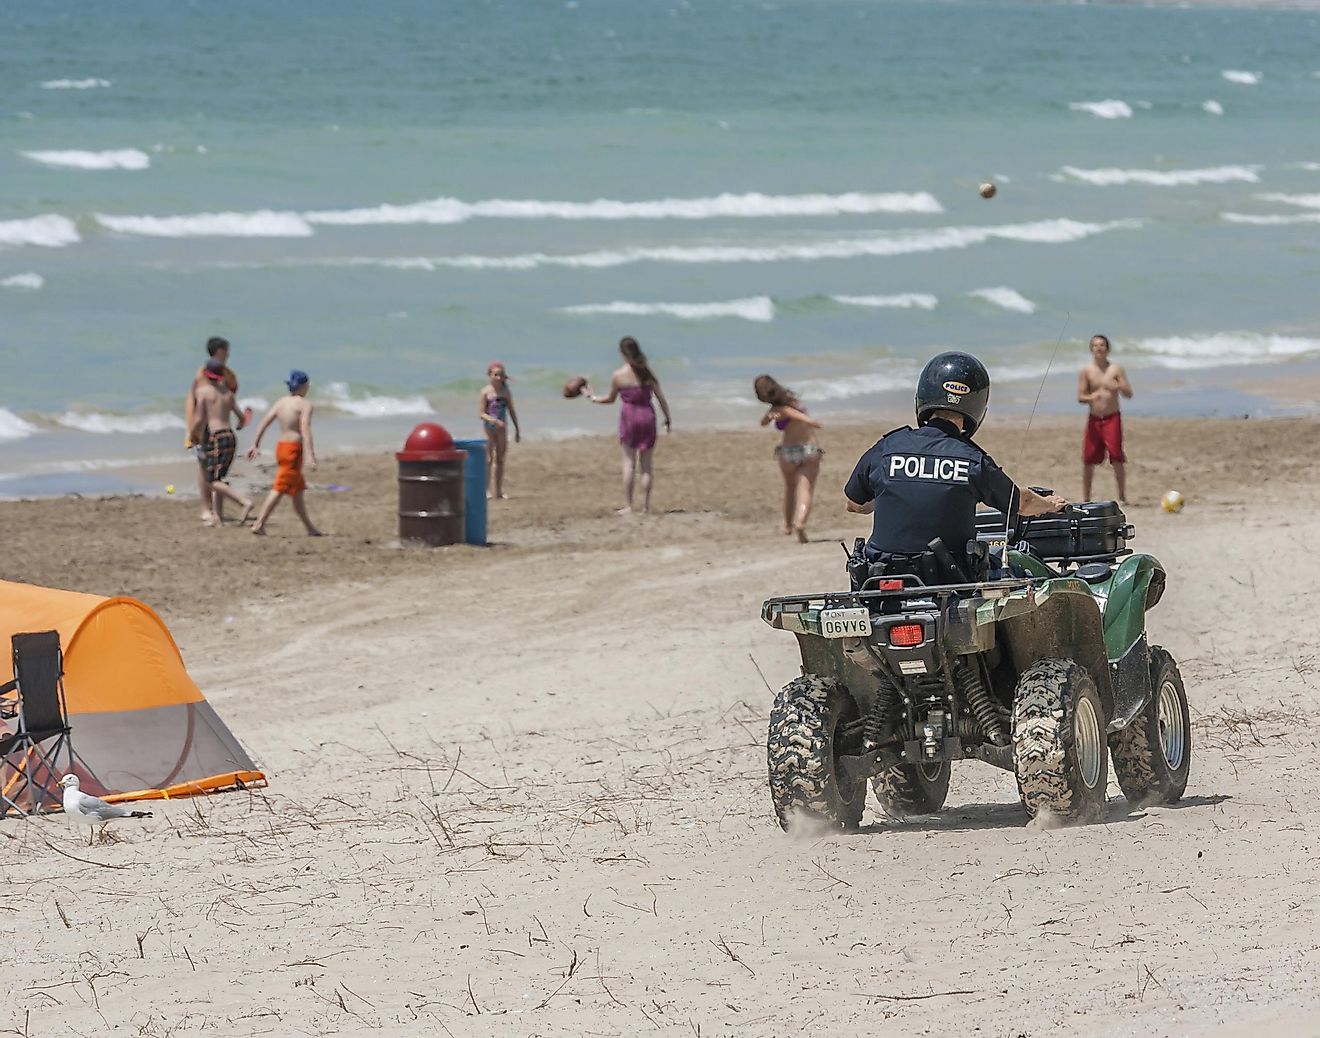 Law enforcement aims to keep the park safe and orderly for beach-goers at Sandbanks Provincial Park in Prince Edward County, Ontario.